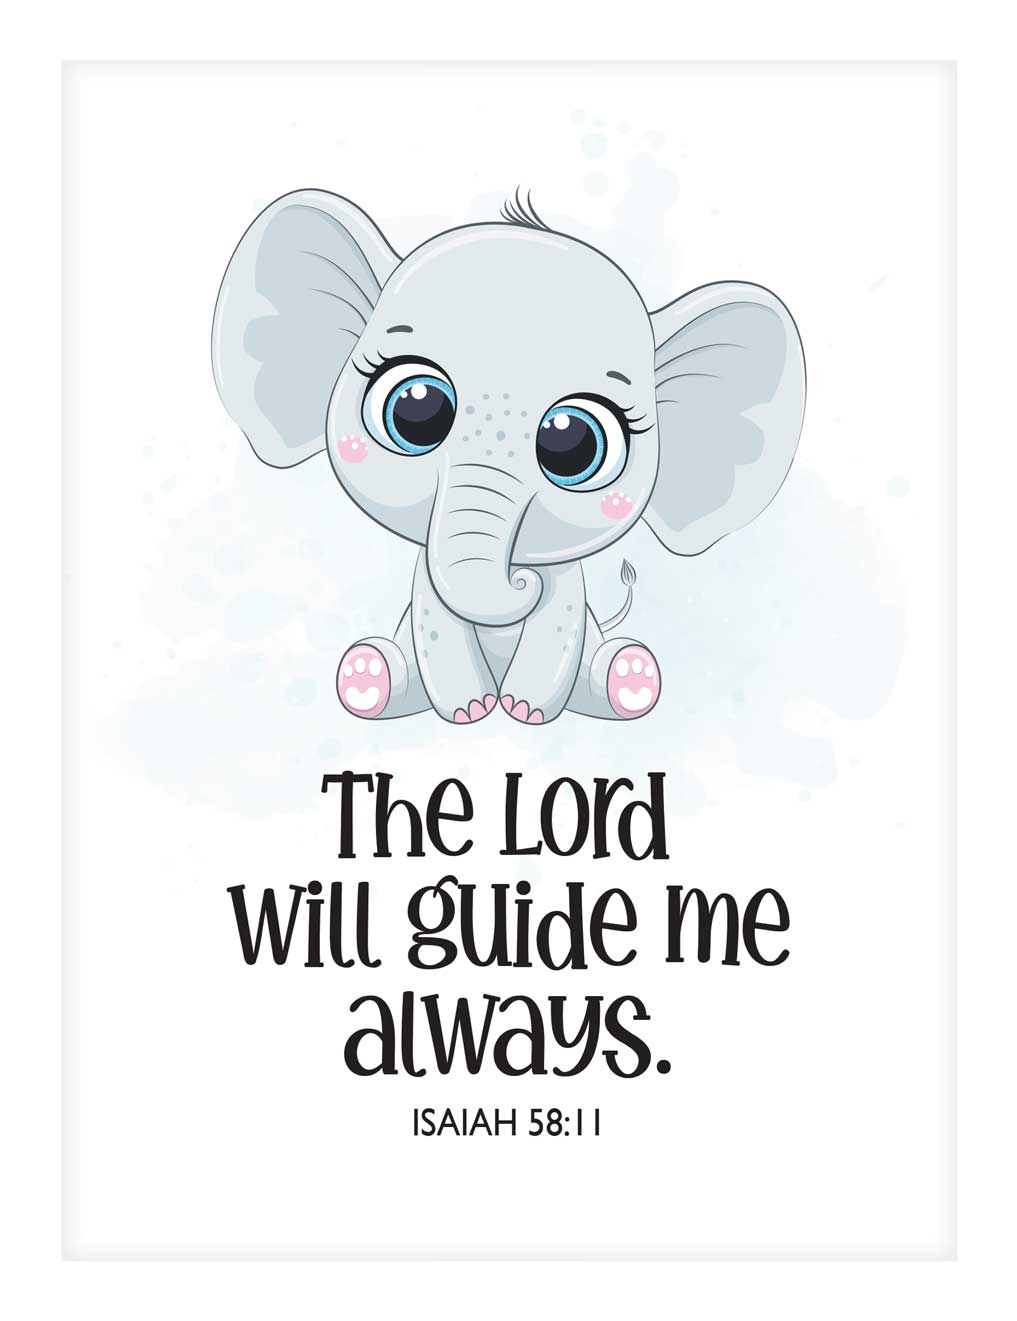 The Lord Will Guide